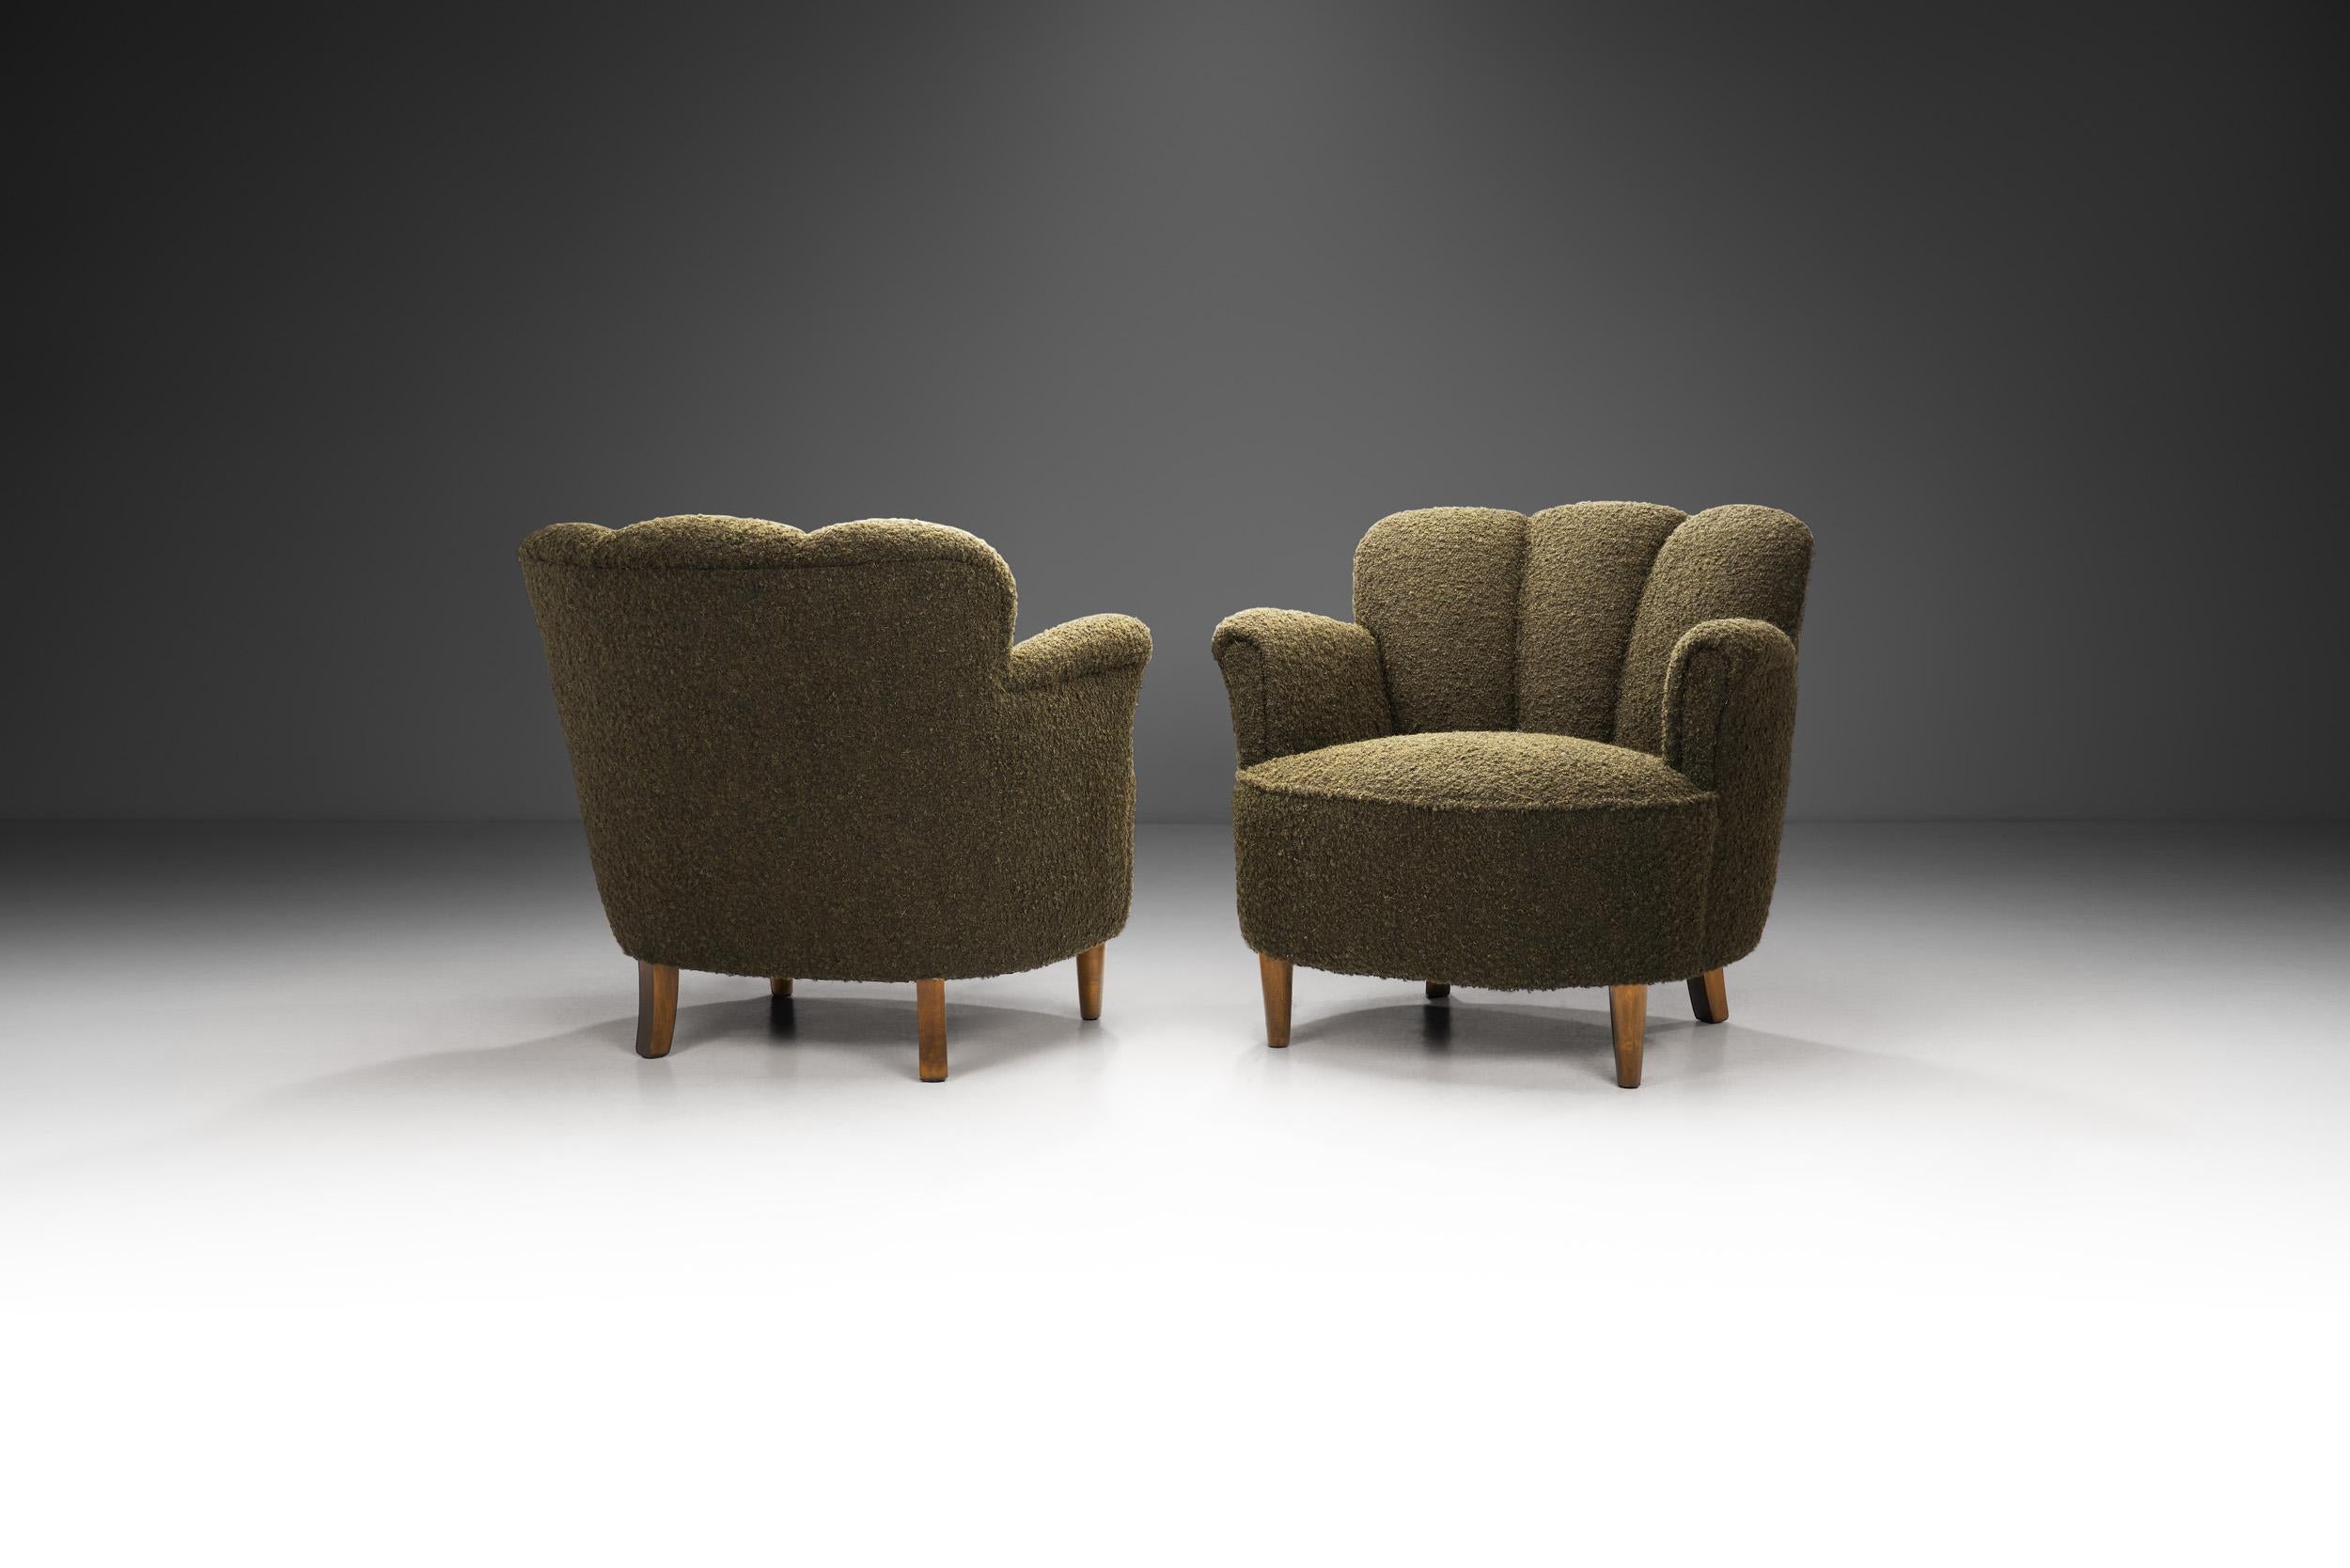 Mid-20th Century European Upholstered Art Deco Lounge Chairs, Europe 1930s For Sale